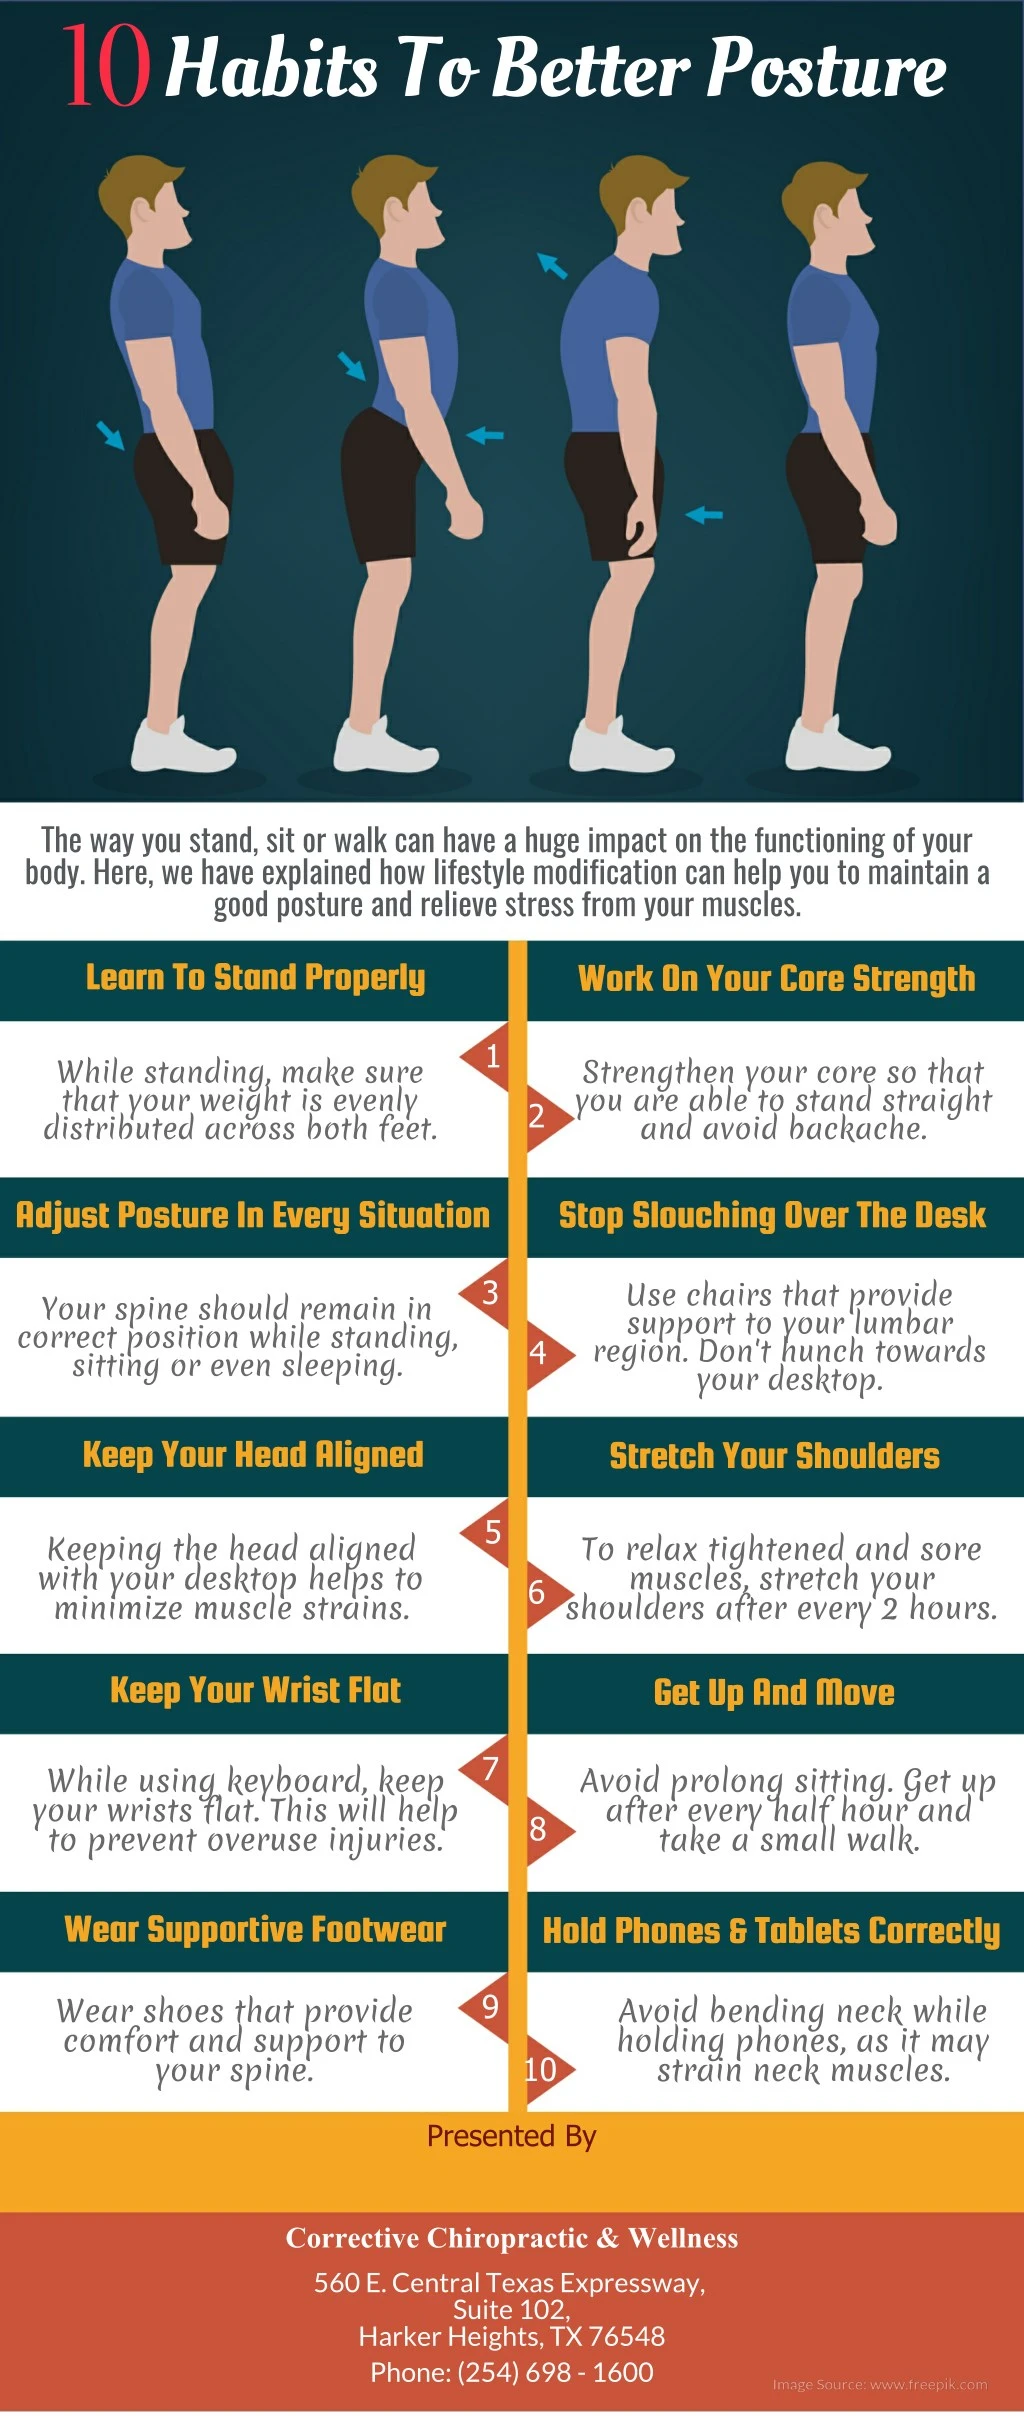 habits to better posture